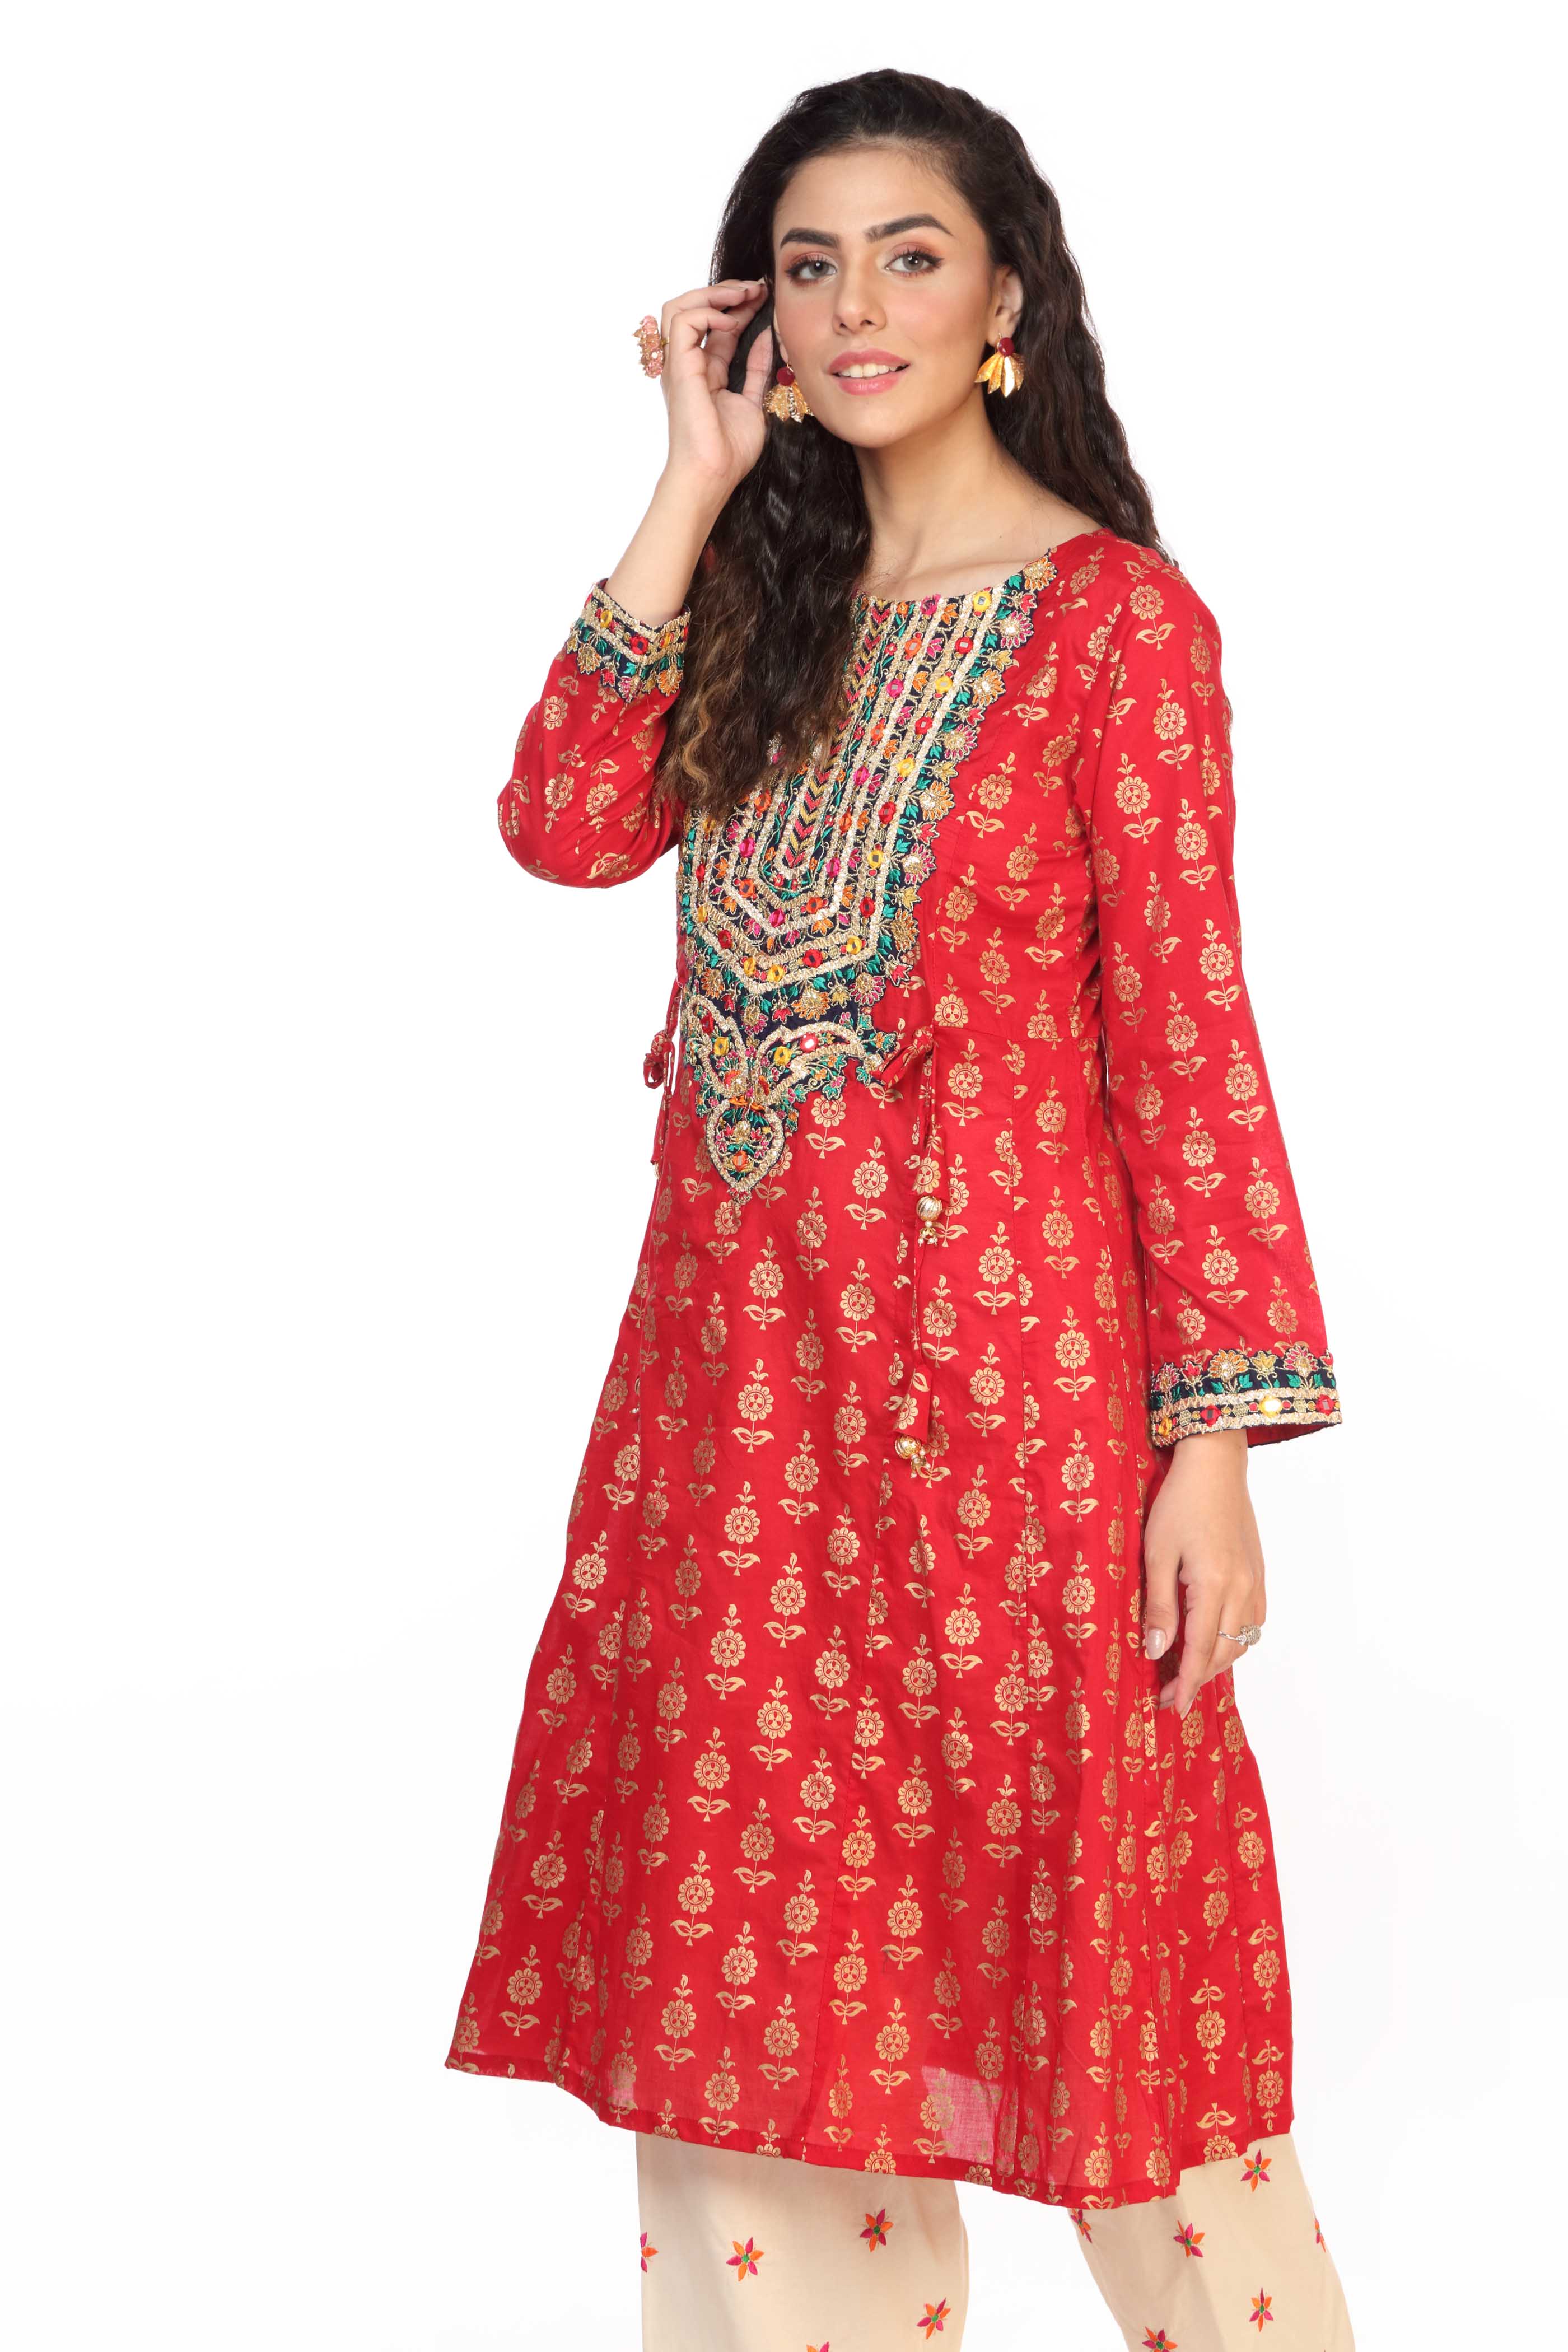 Discover Timeless Style: Blue Paisley 3 Frock in Red Printed Lawn ...